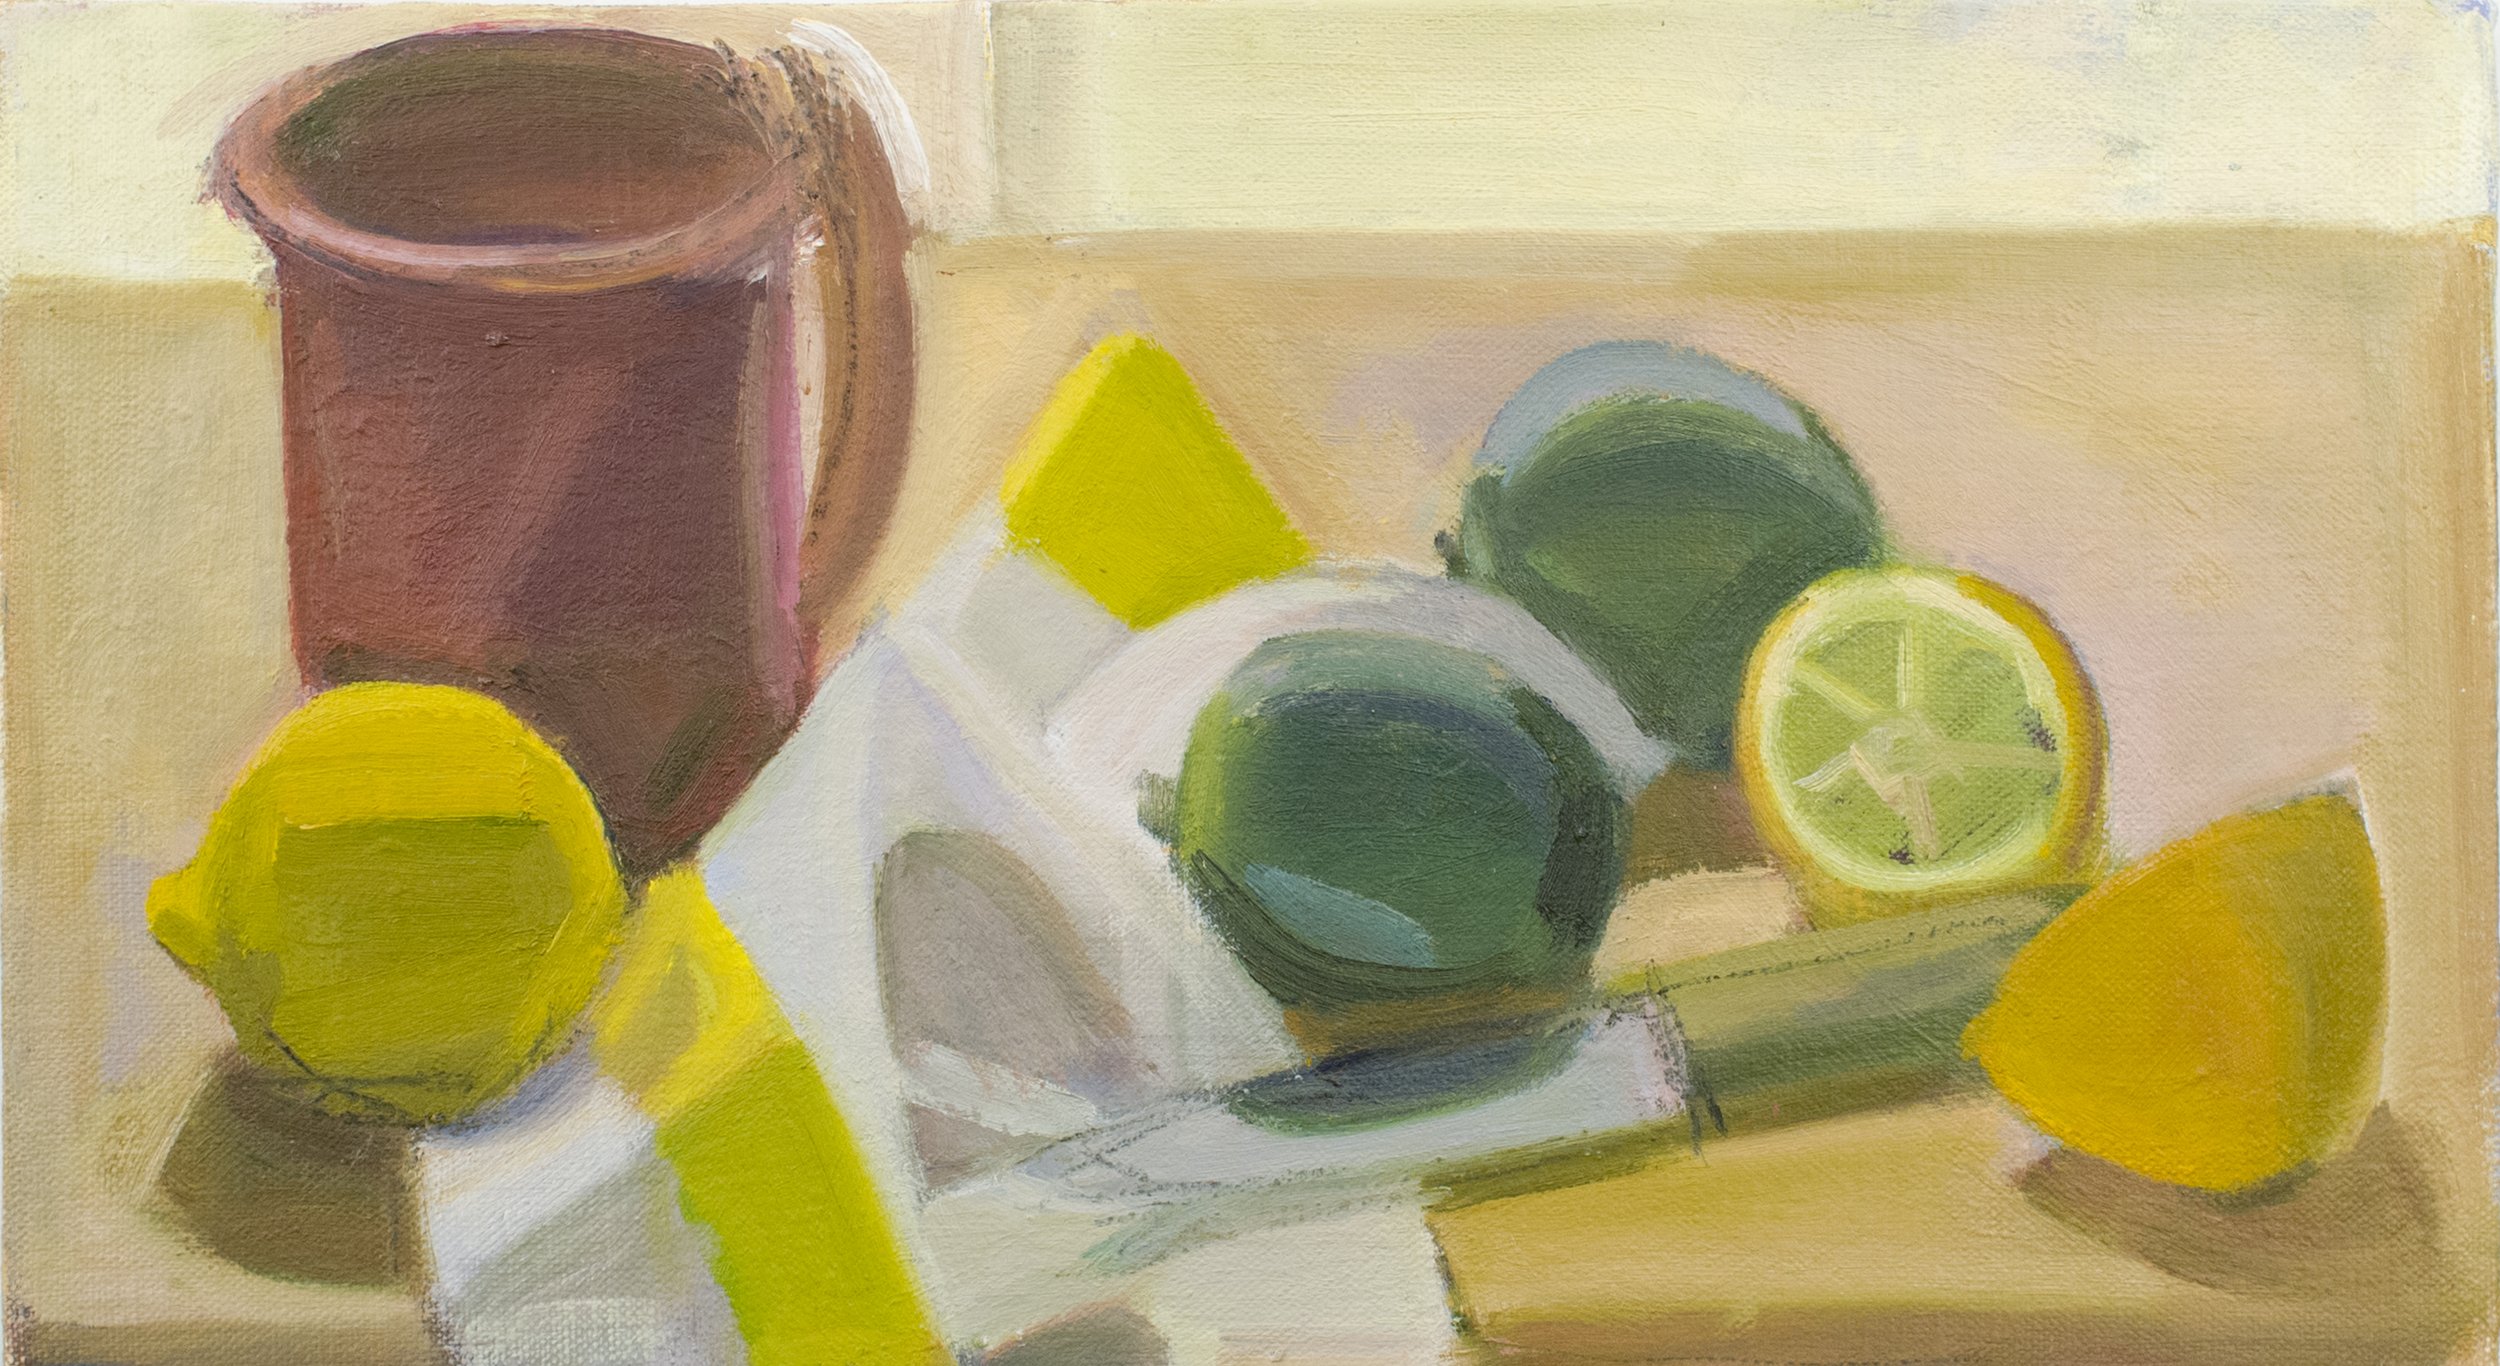   Pink Cup with Cut Lemon and Limes , 2014, oil/canvas, 8 x 14 in. (Private collection) 